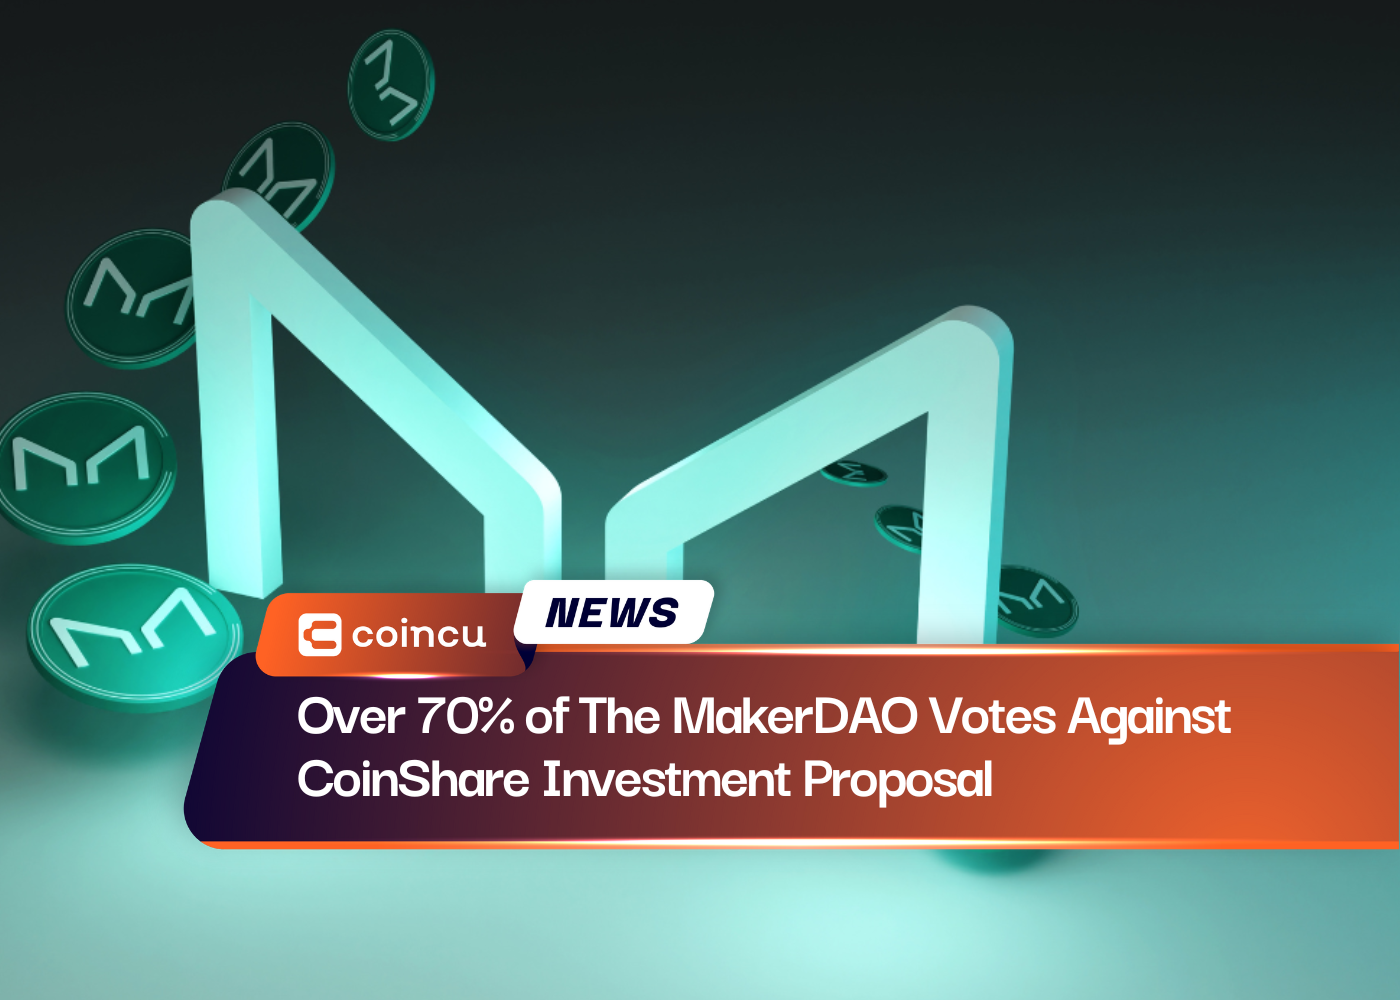 Over 70% of The MakerDAO Votes Against CoinShare Investment Proposal